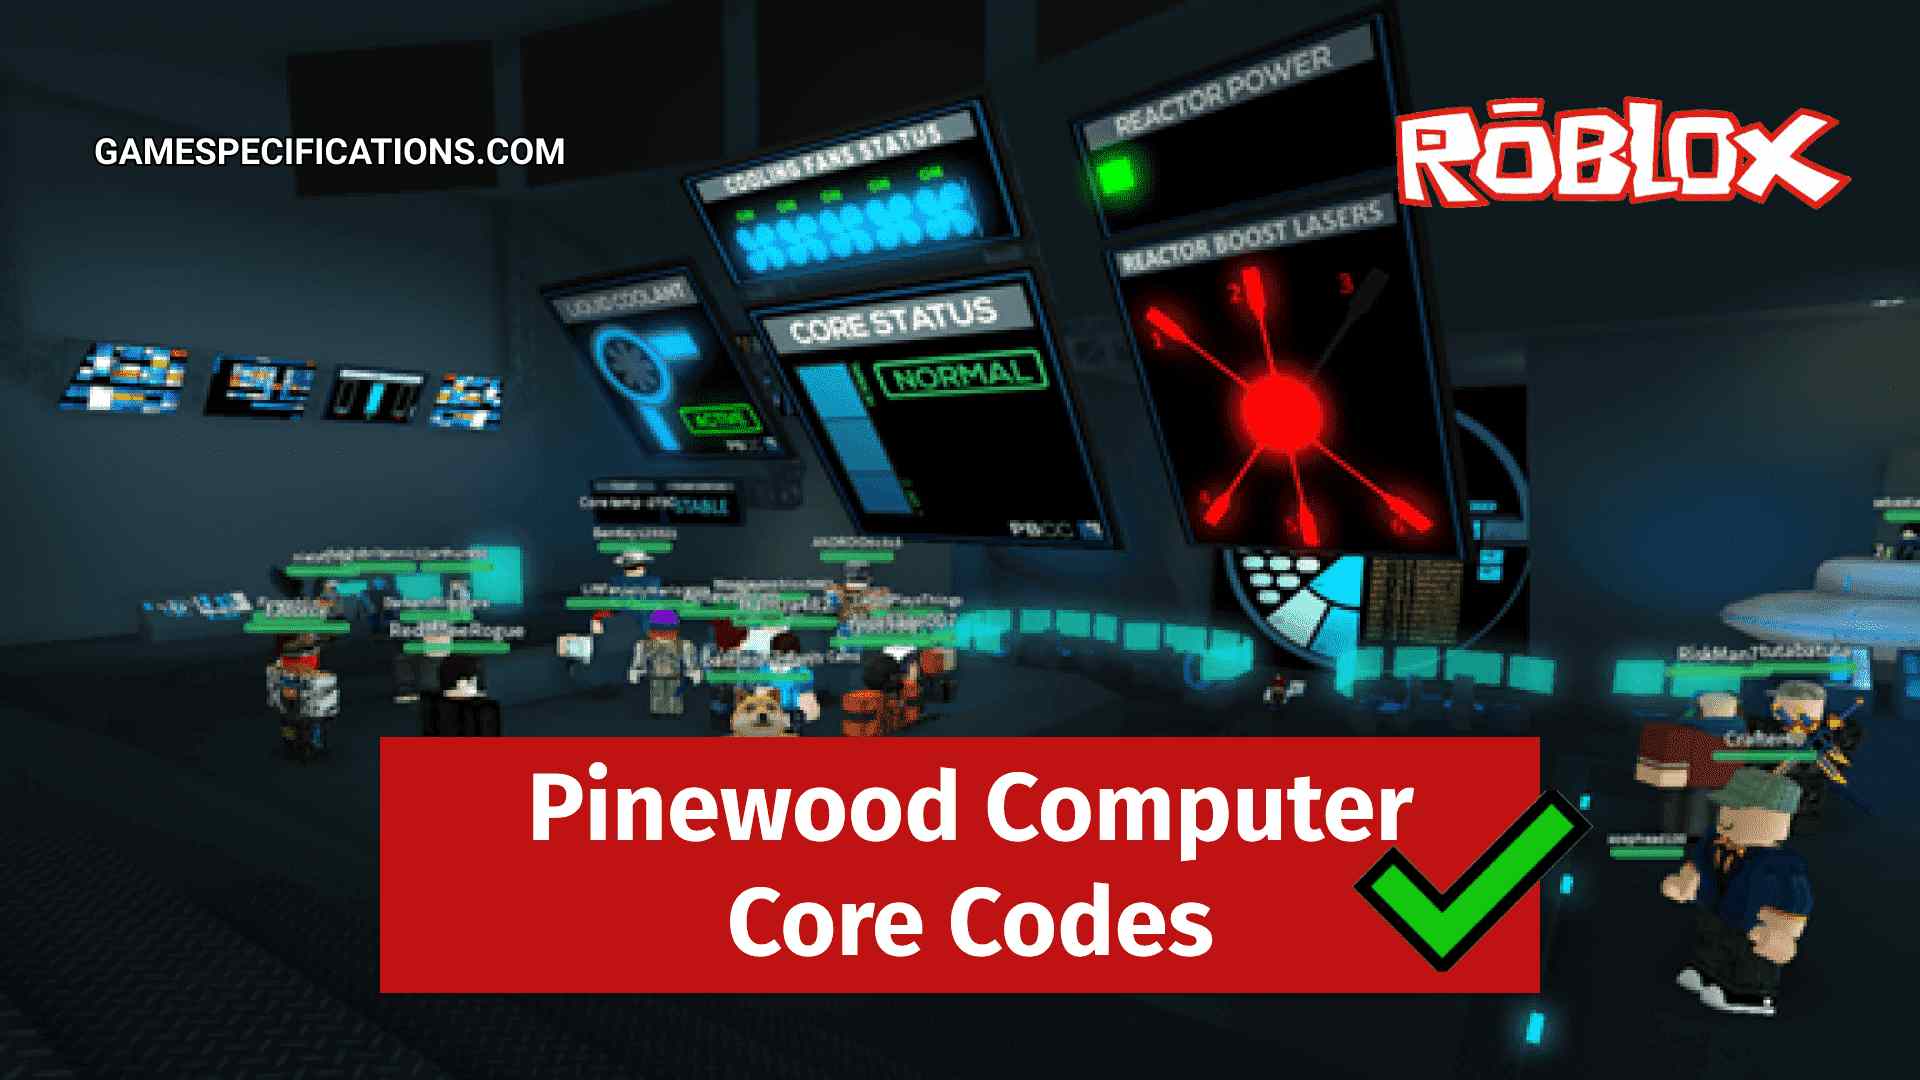 Roblox Pinewood Computer Core Codes July 2021 Game Specifications - assassin roblox radio the normal codes